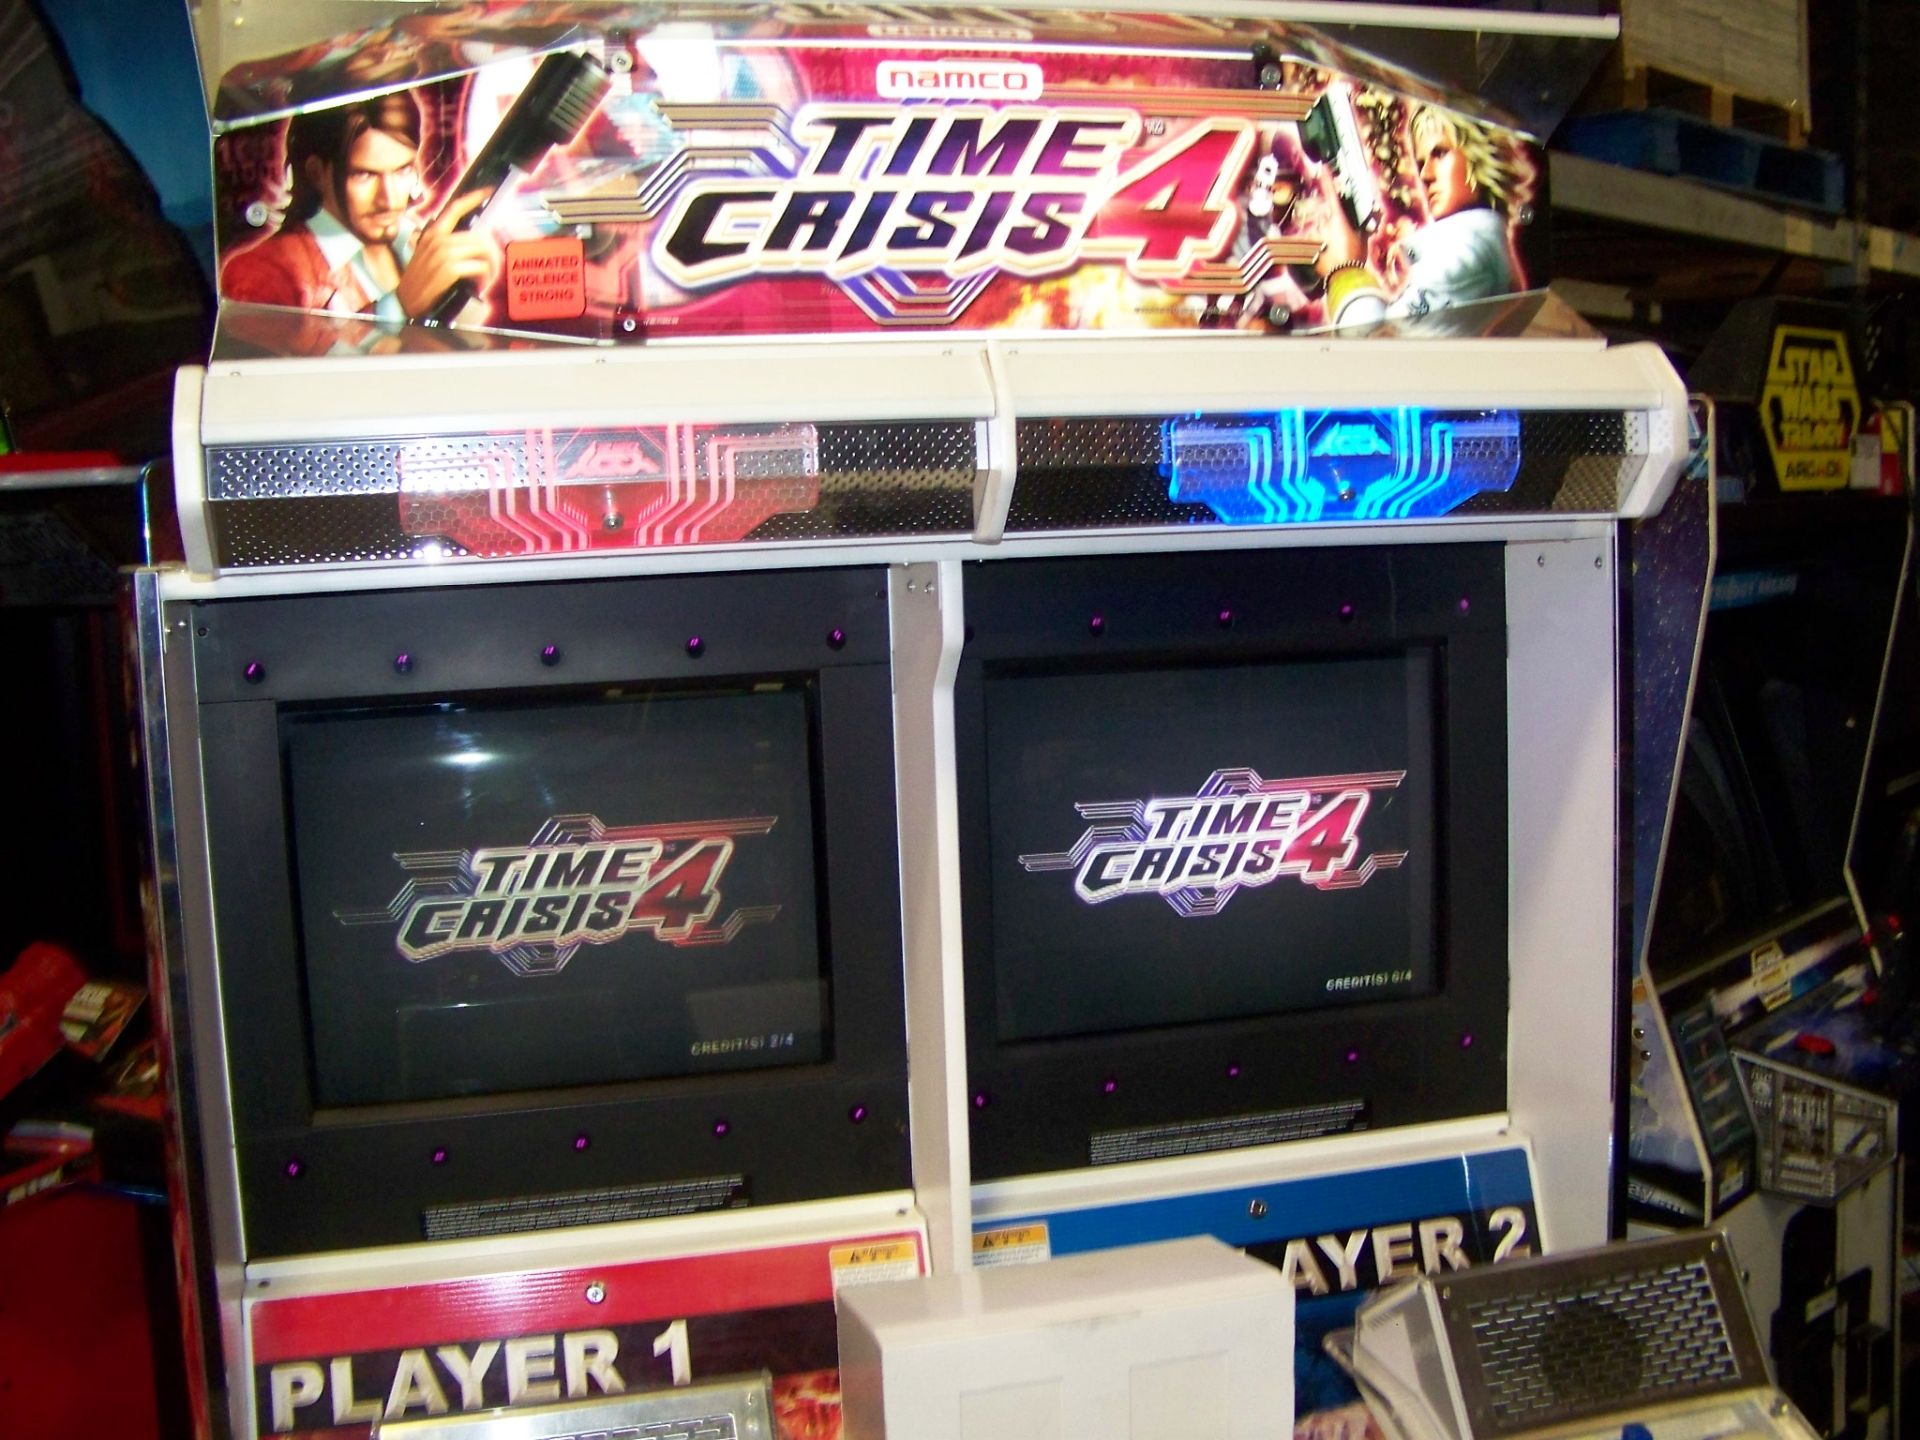 TIME CRISIS 4 TWIN SHOOTER ARCADE GAME NAMCO Item is in used condition. Evidence of wear and - Image 9 of 9